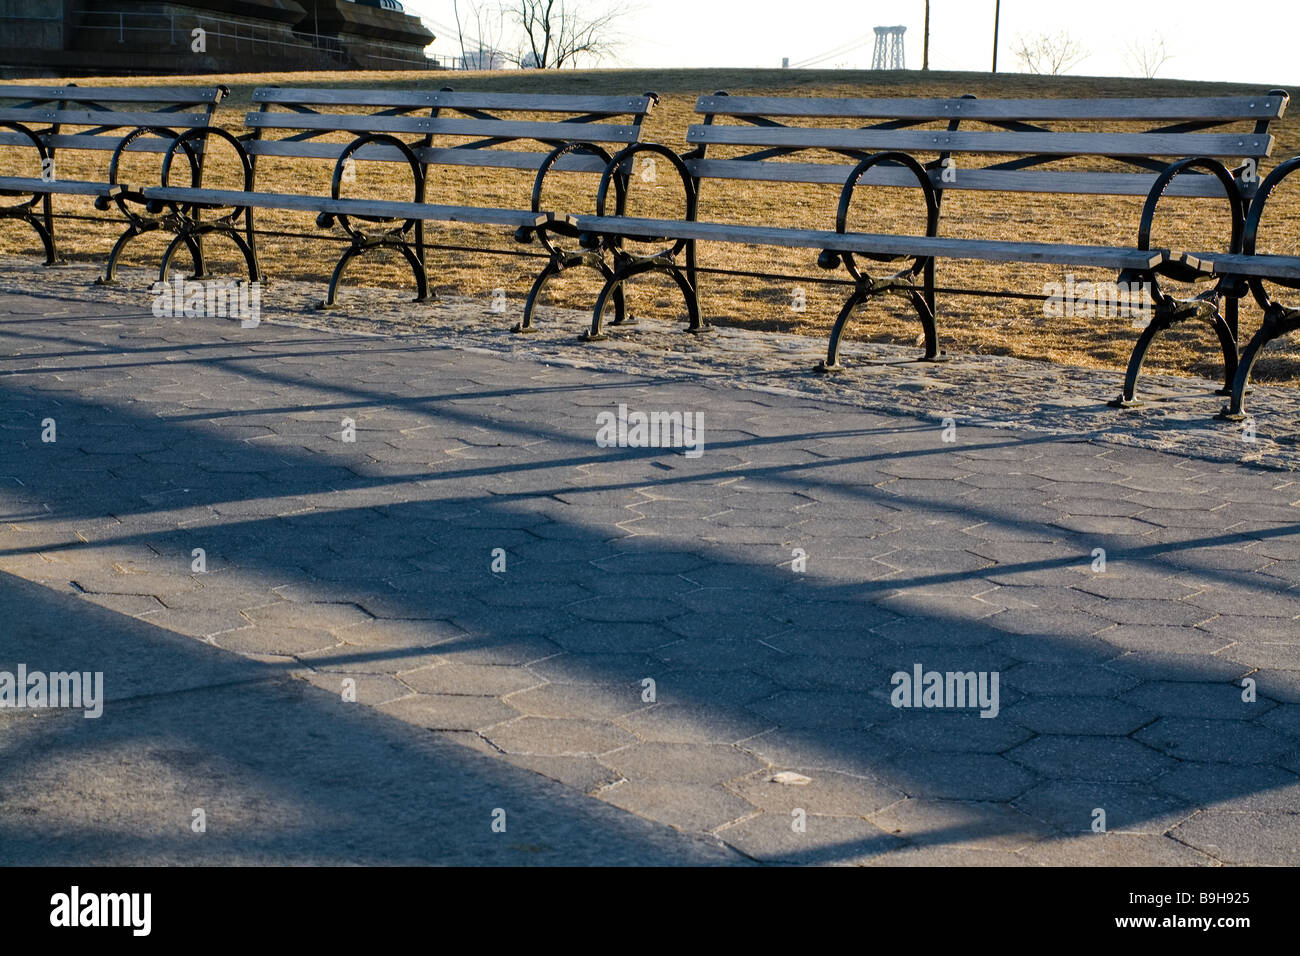 Park Benches, Empire-Fulton Ferry State Park, Brooklyn, USA Stock Photo